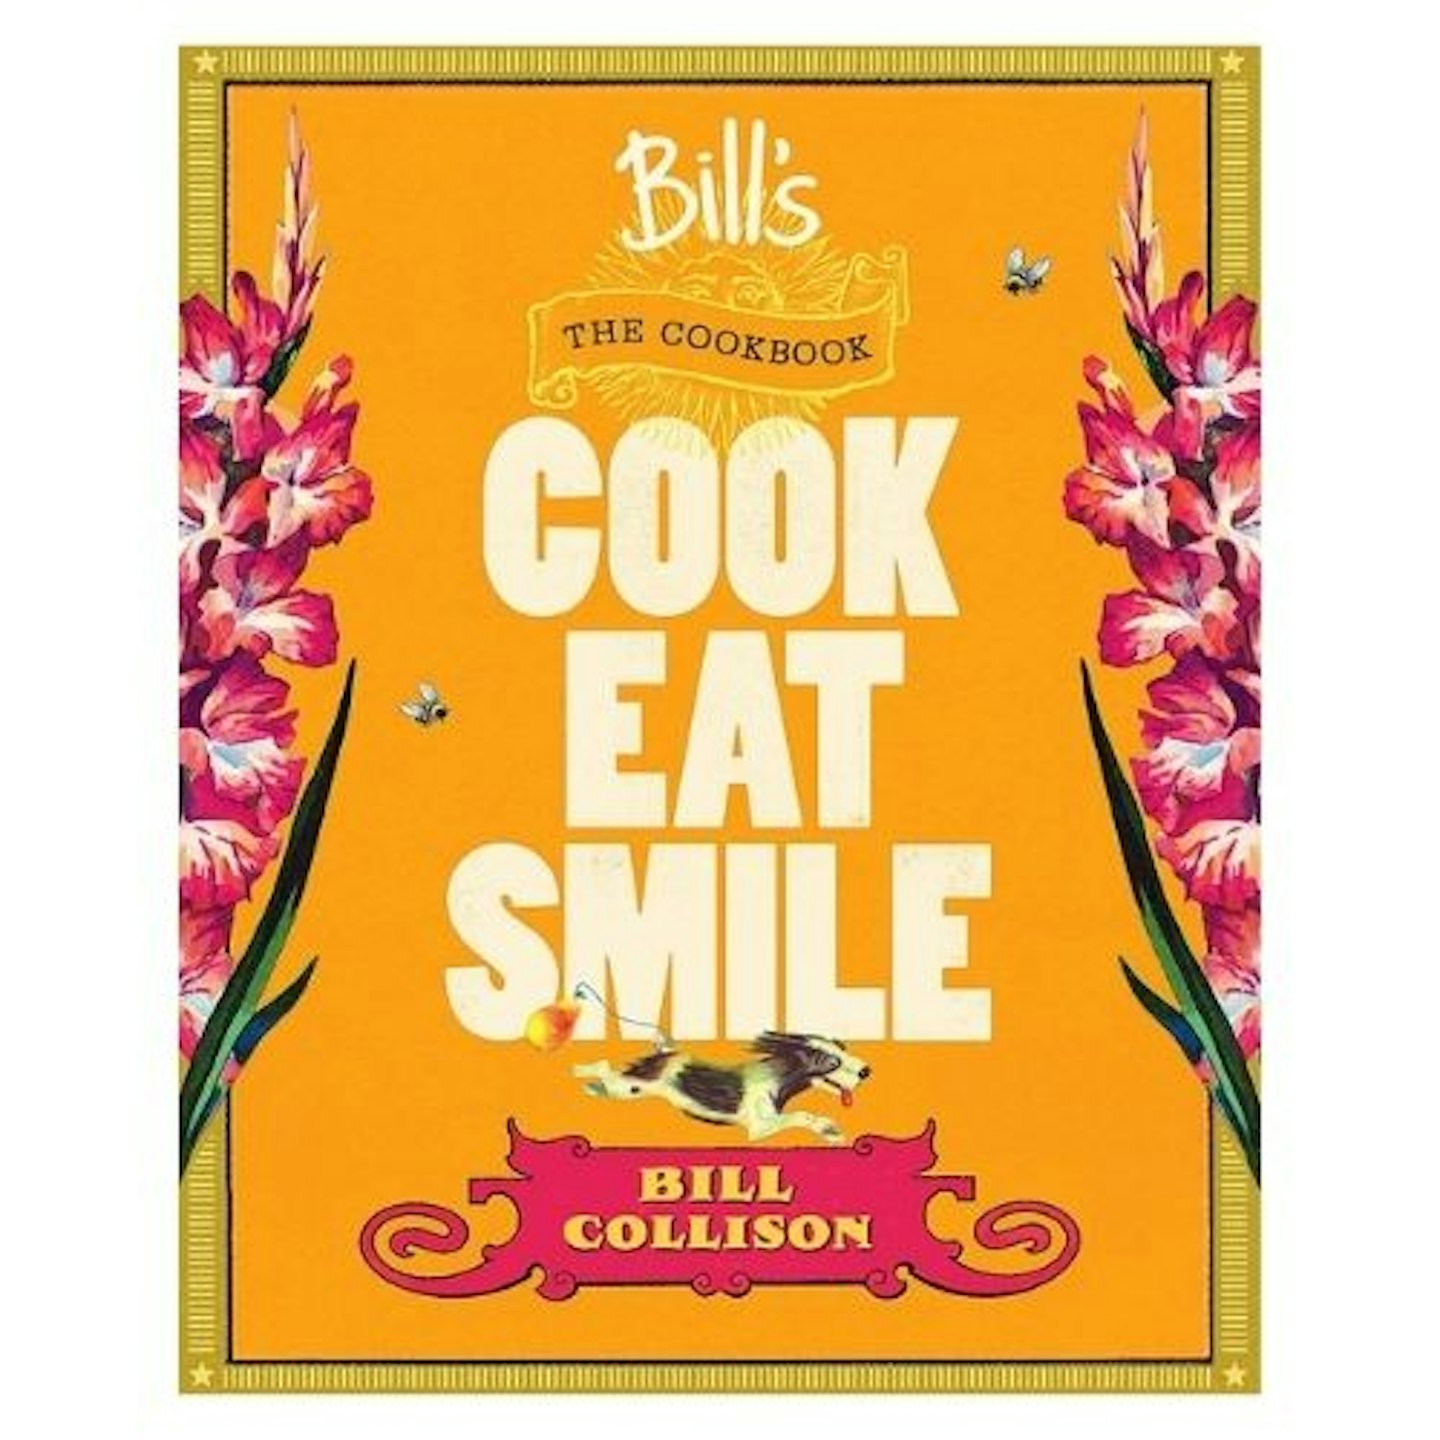 Bill's: The Cookbook: Cook, Eat, Smile